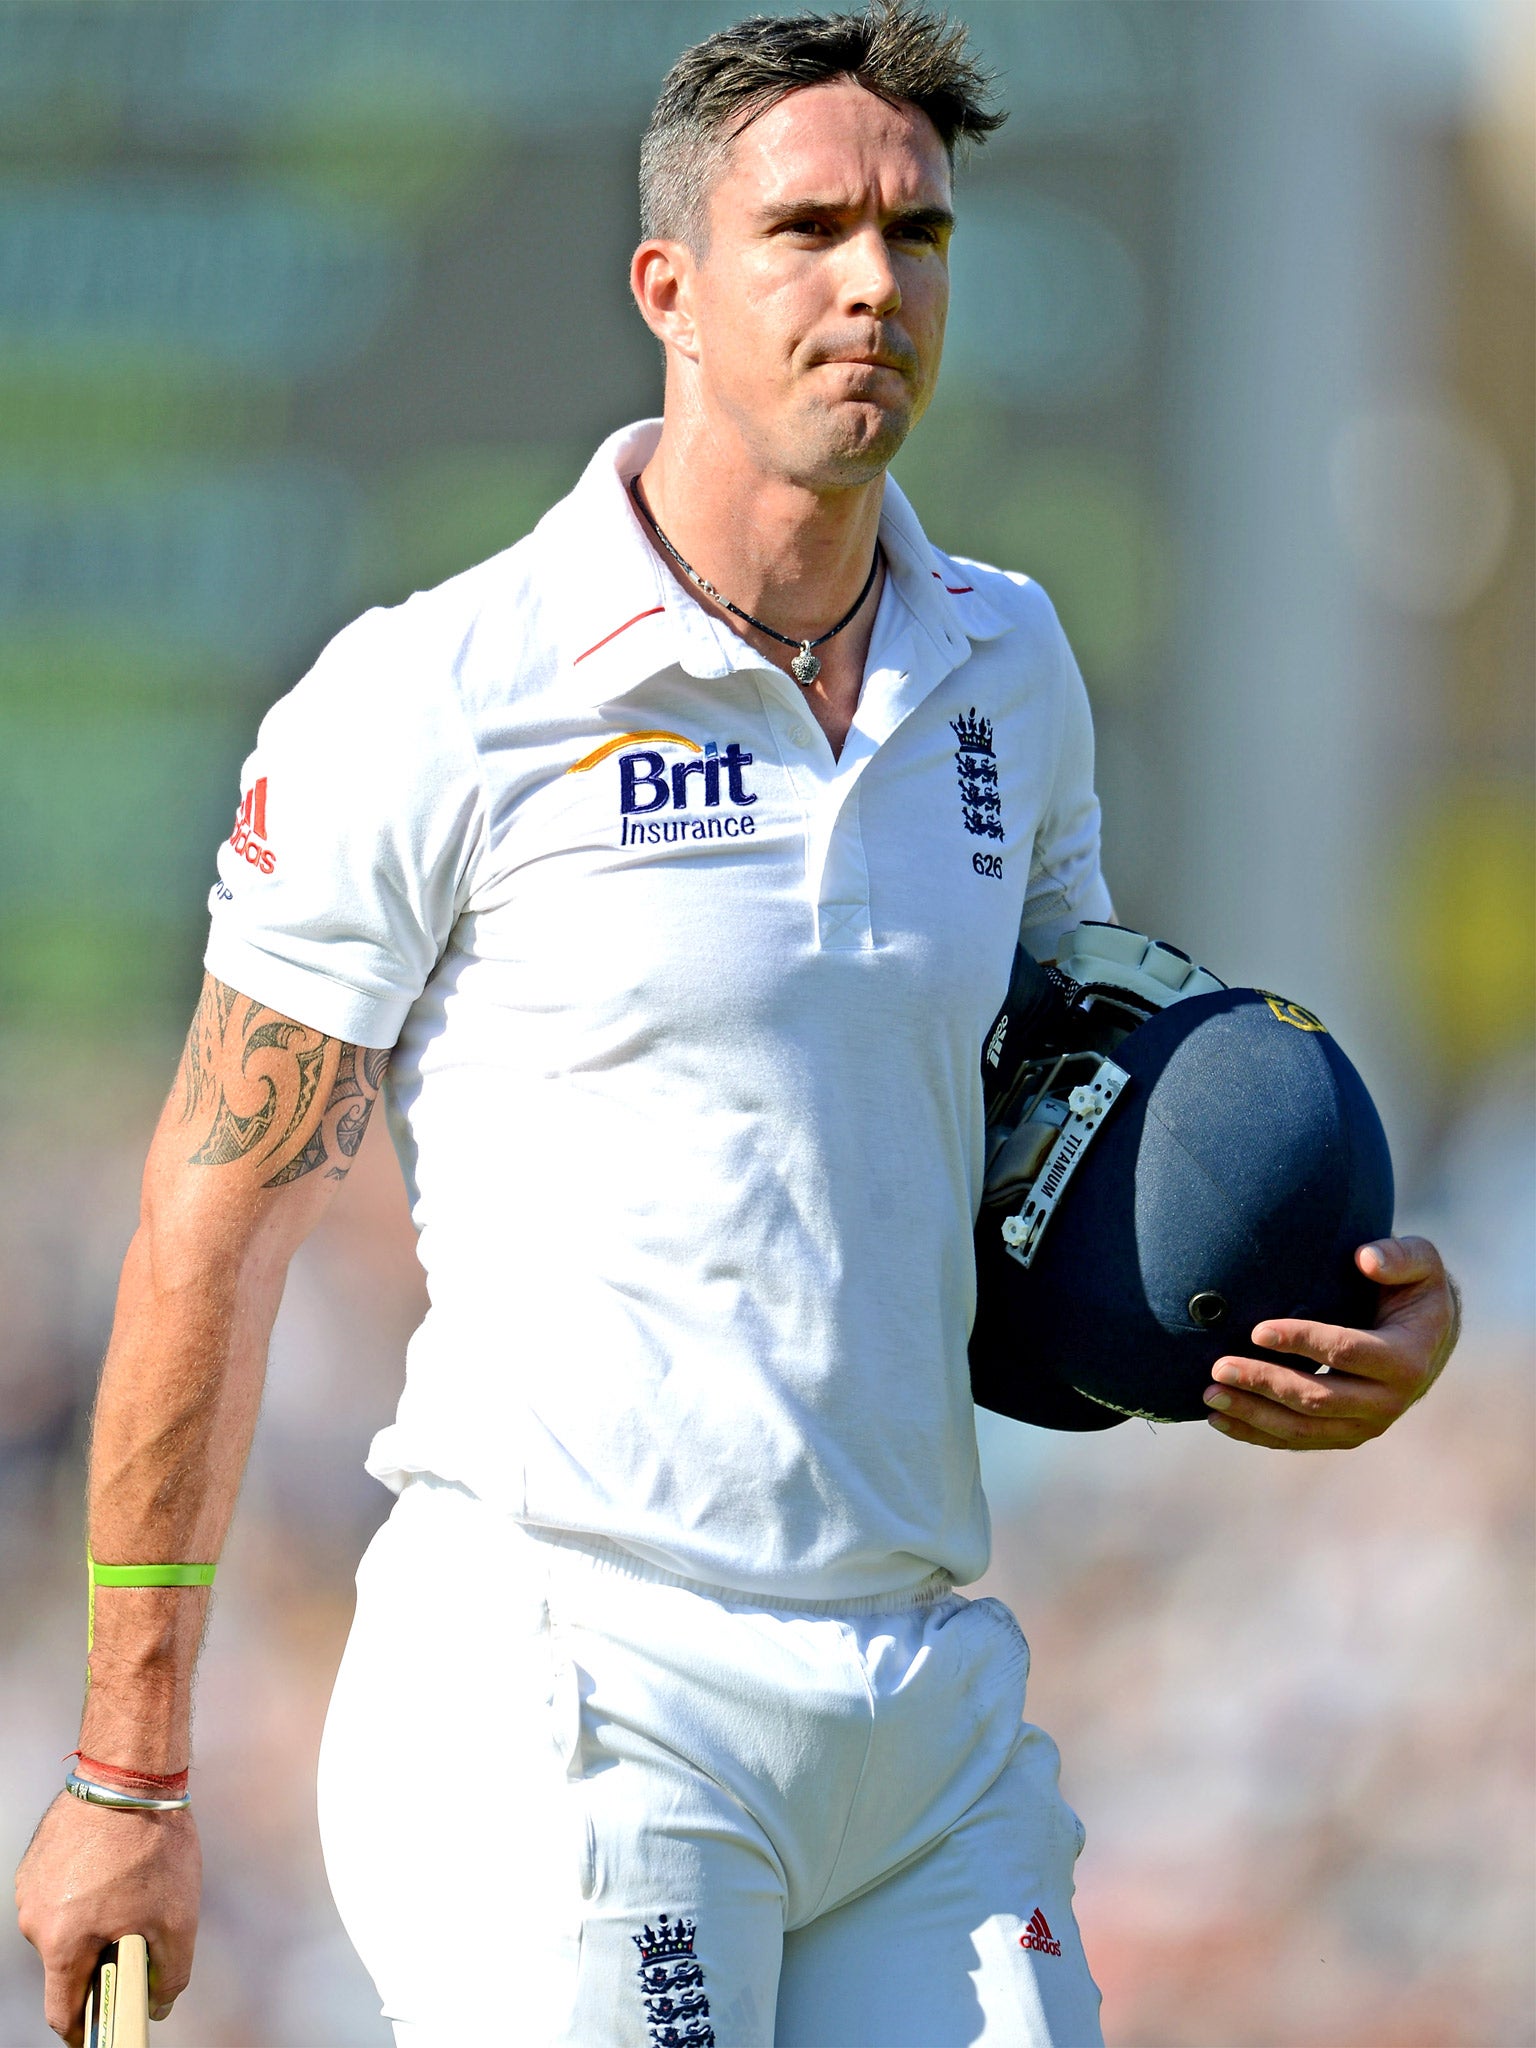 Kevin Pietersen - the most controversial England player of recent times